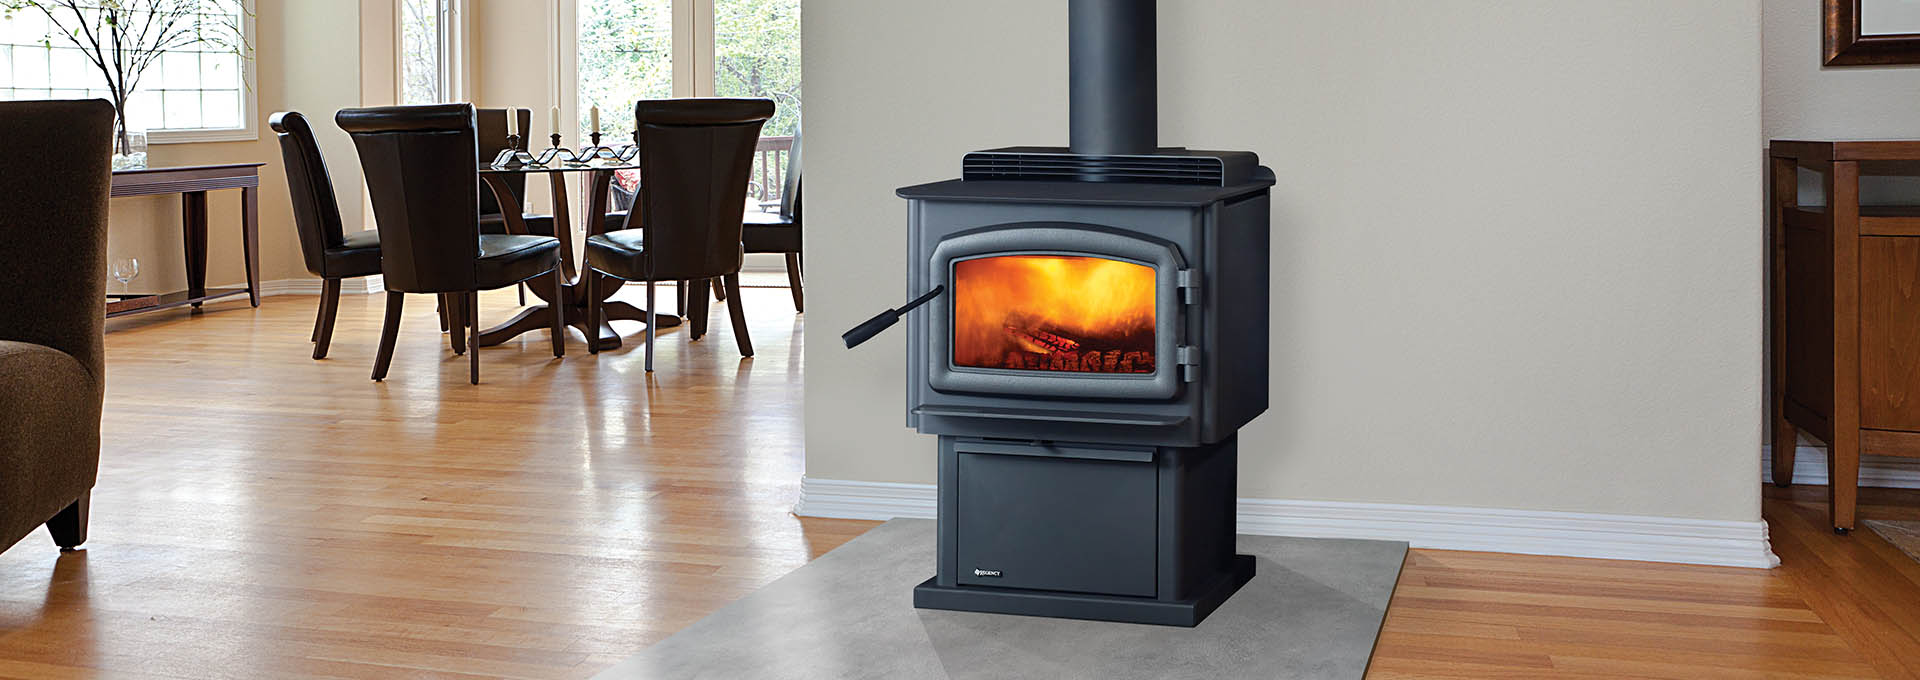 Annual Cost of Operating a Wood Burning Stove  